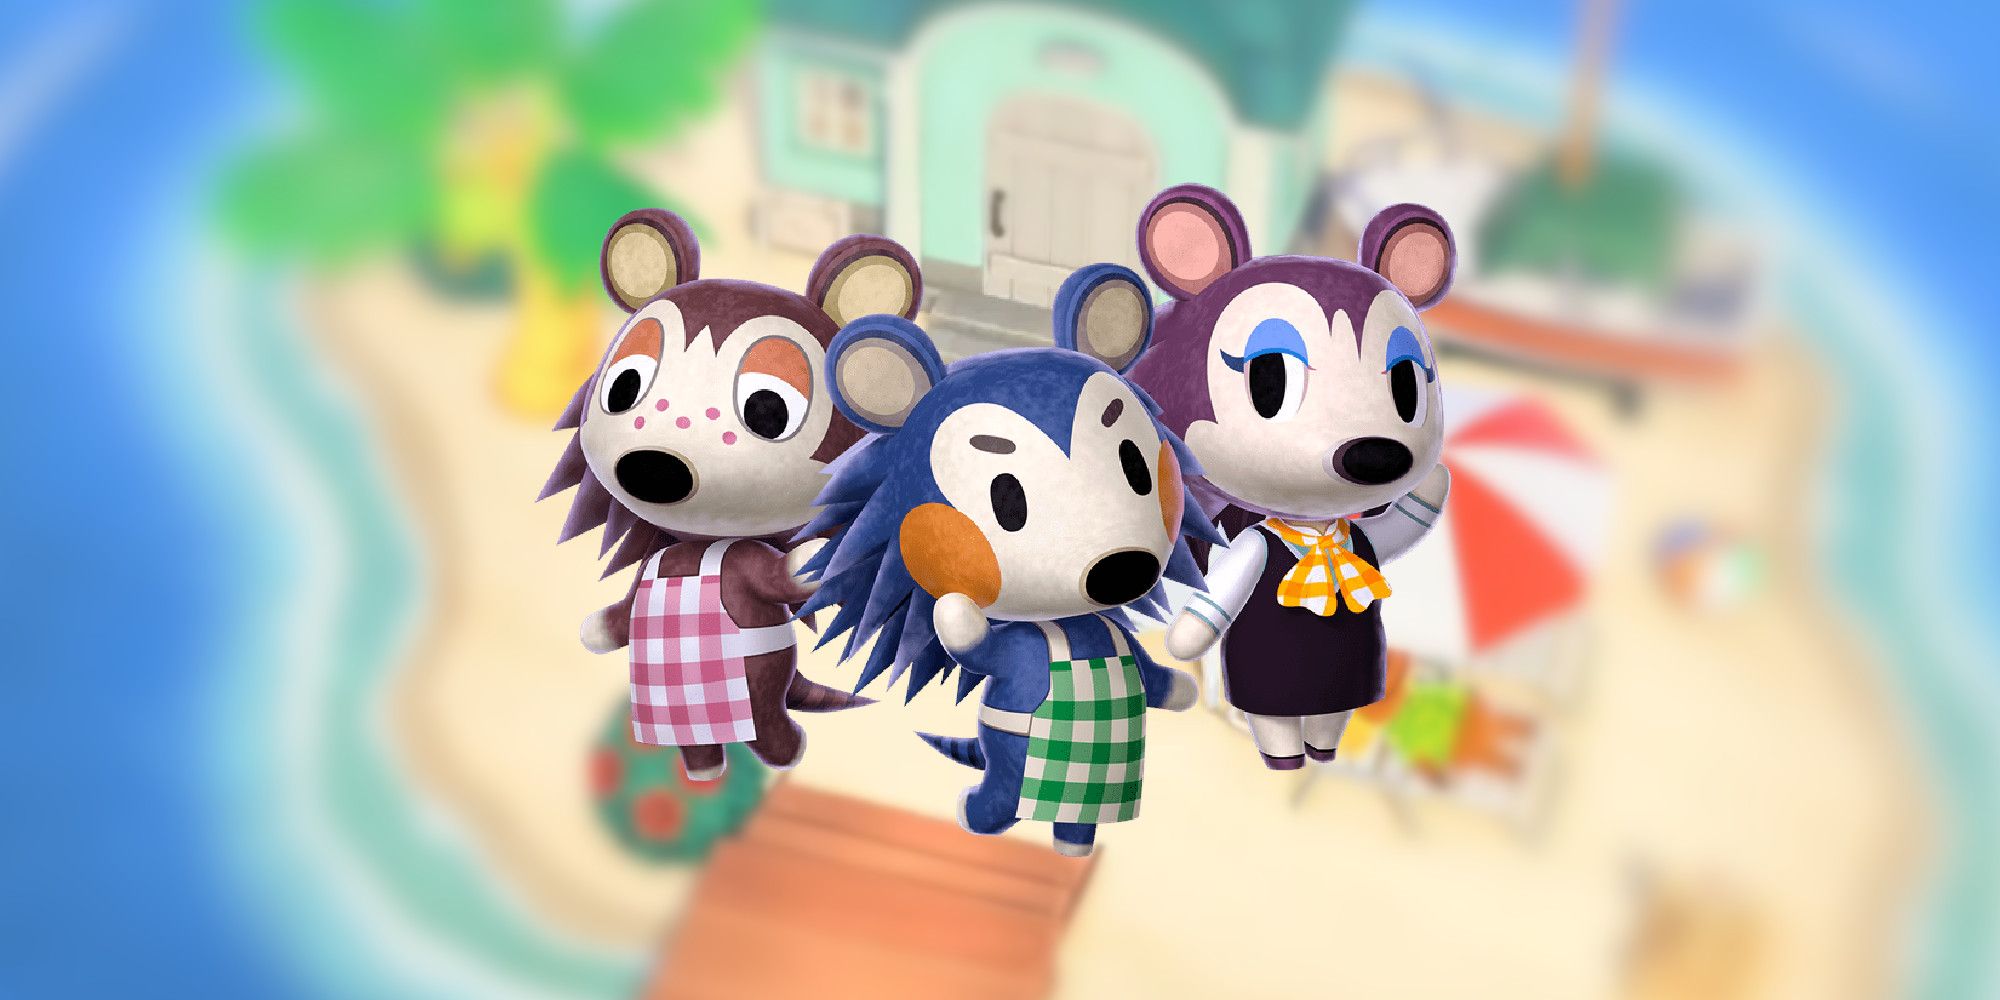 Mable, Sable, and Label from Happy Home Paradise